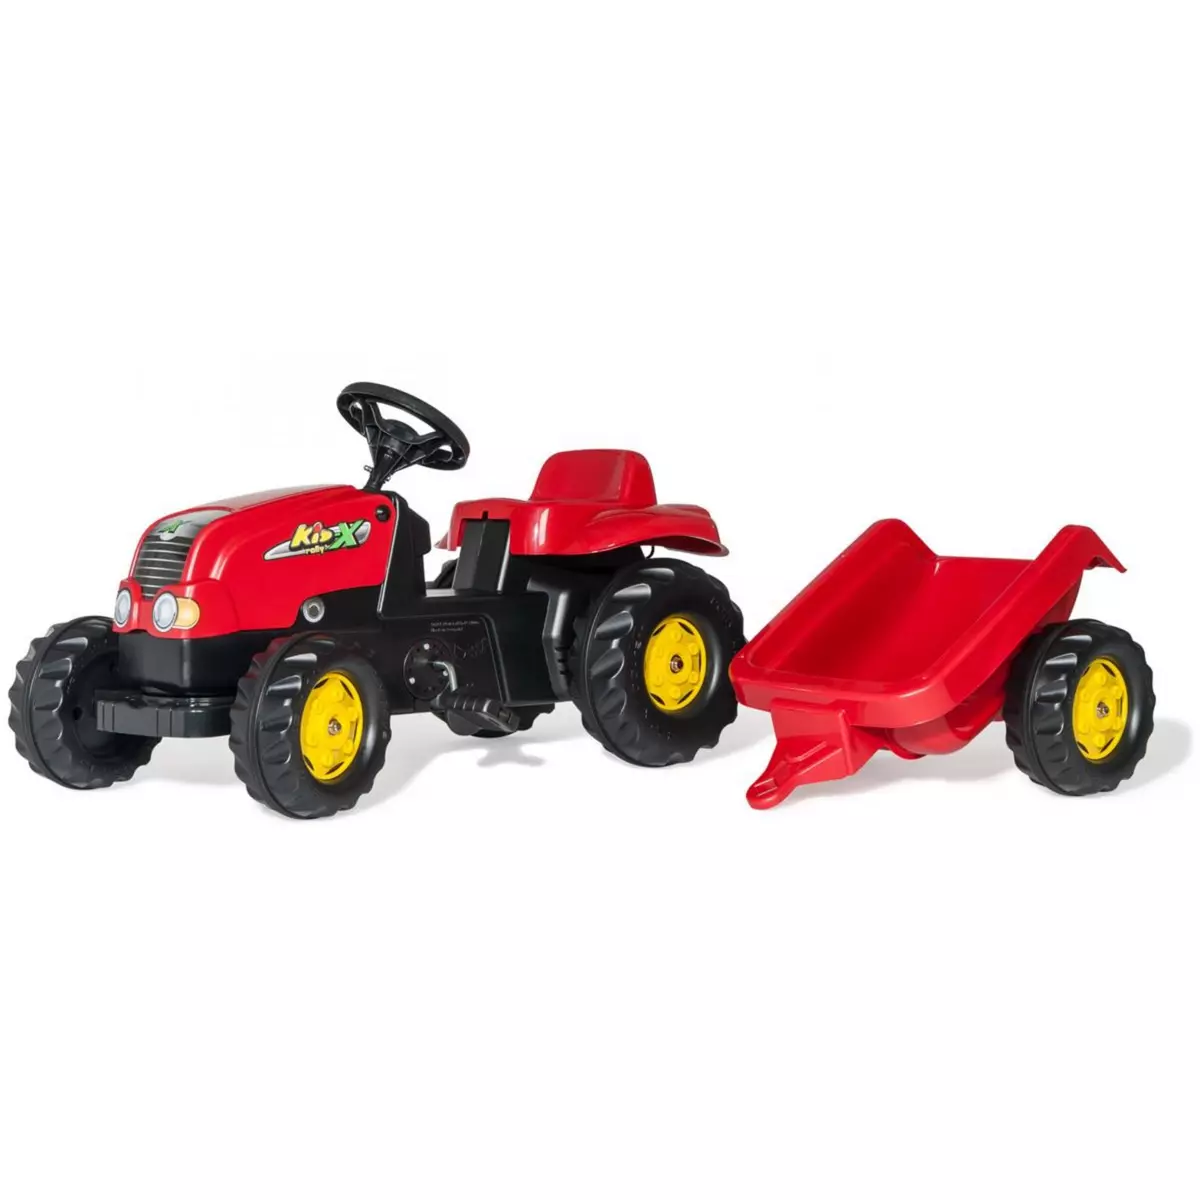 ROLLY TOYS Tracteur a Pedales + Remorque rollyKid-X Rouge